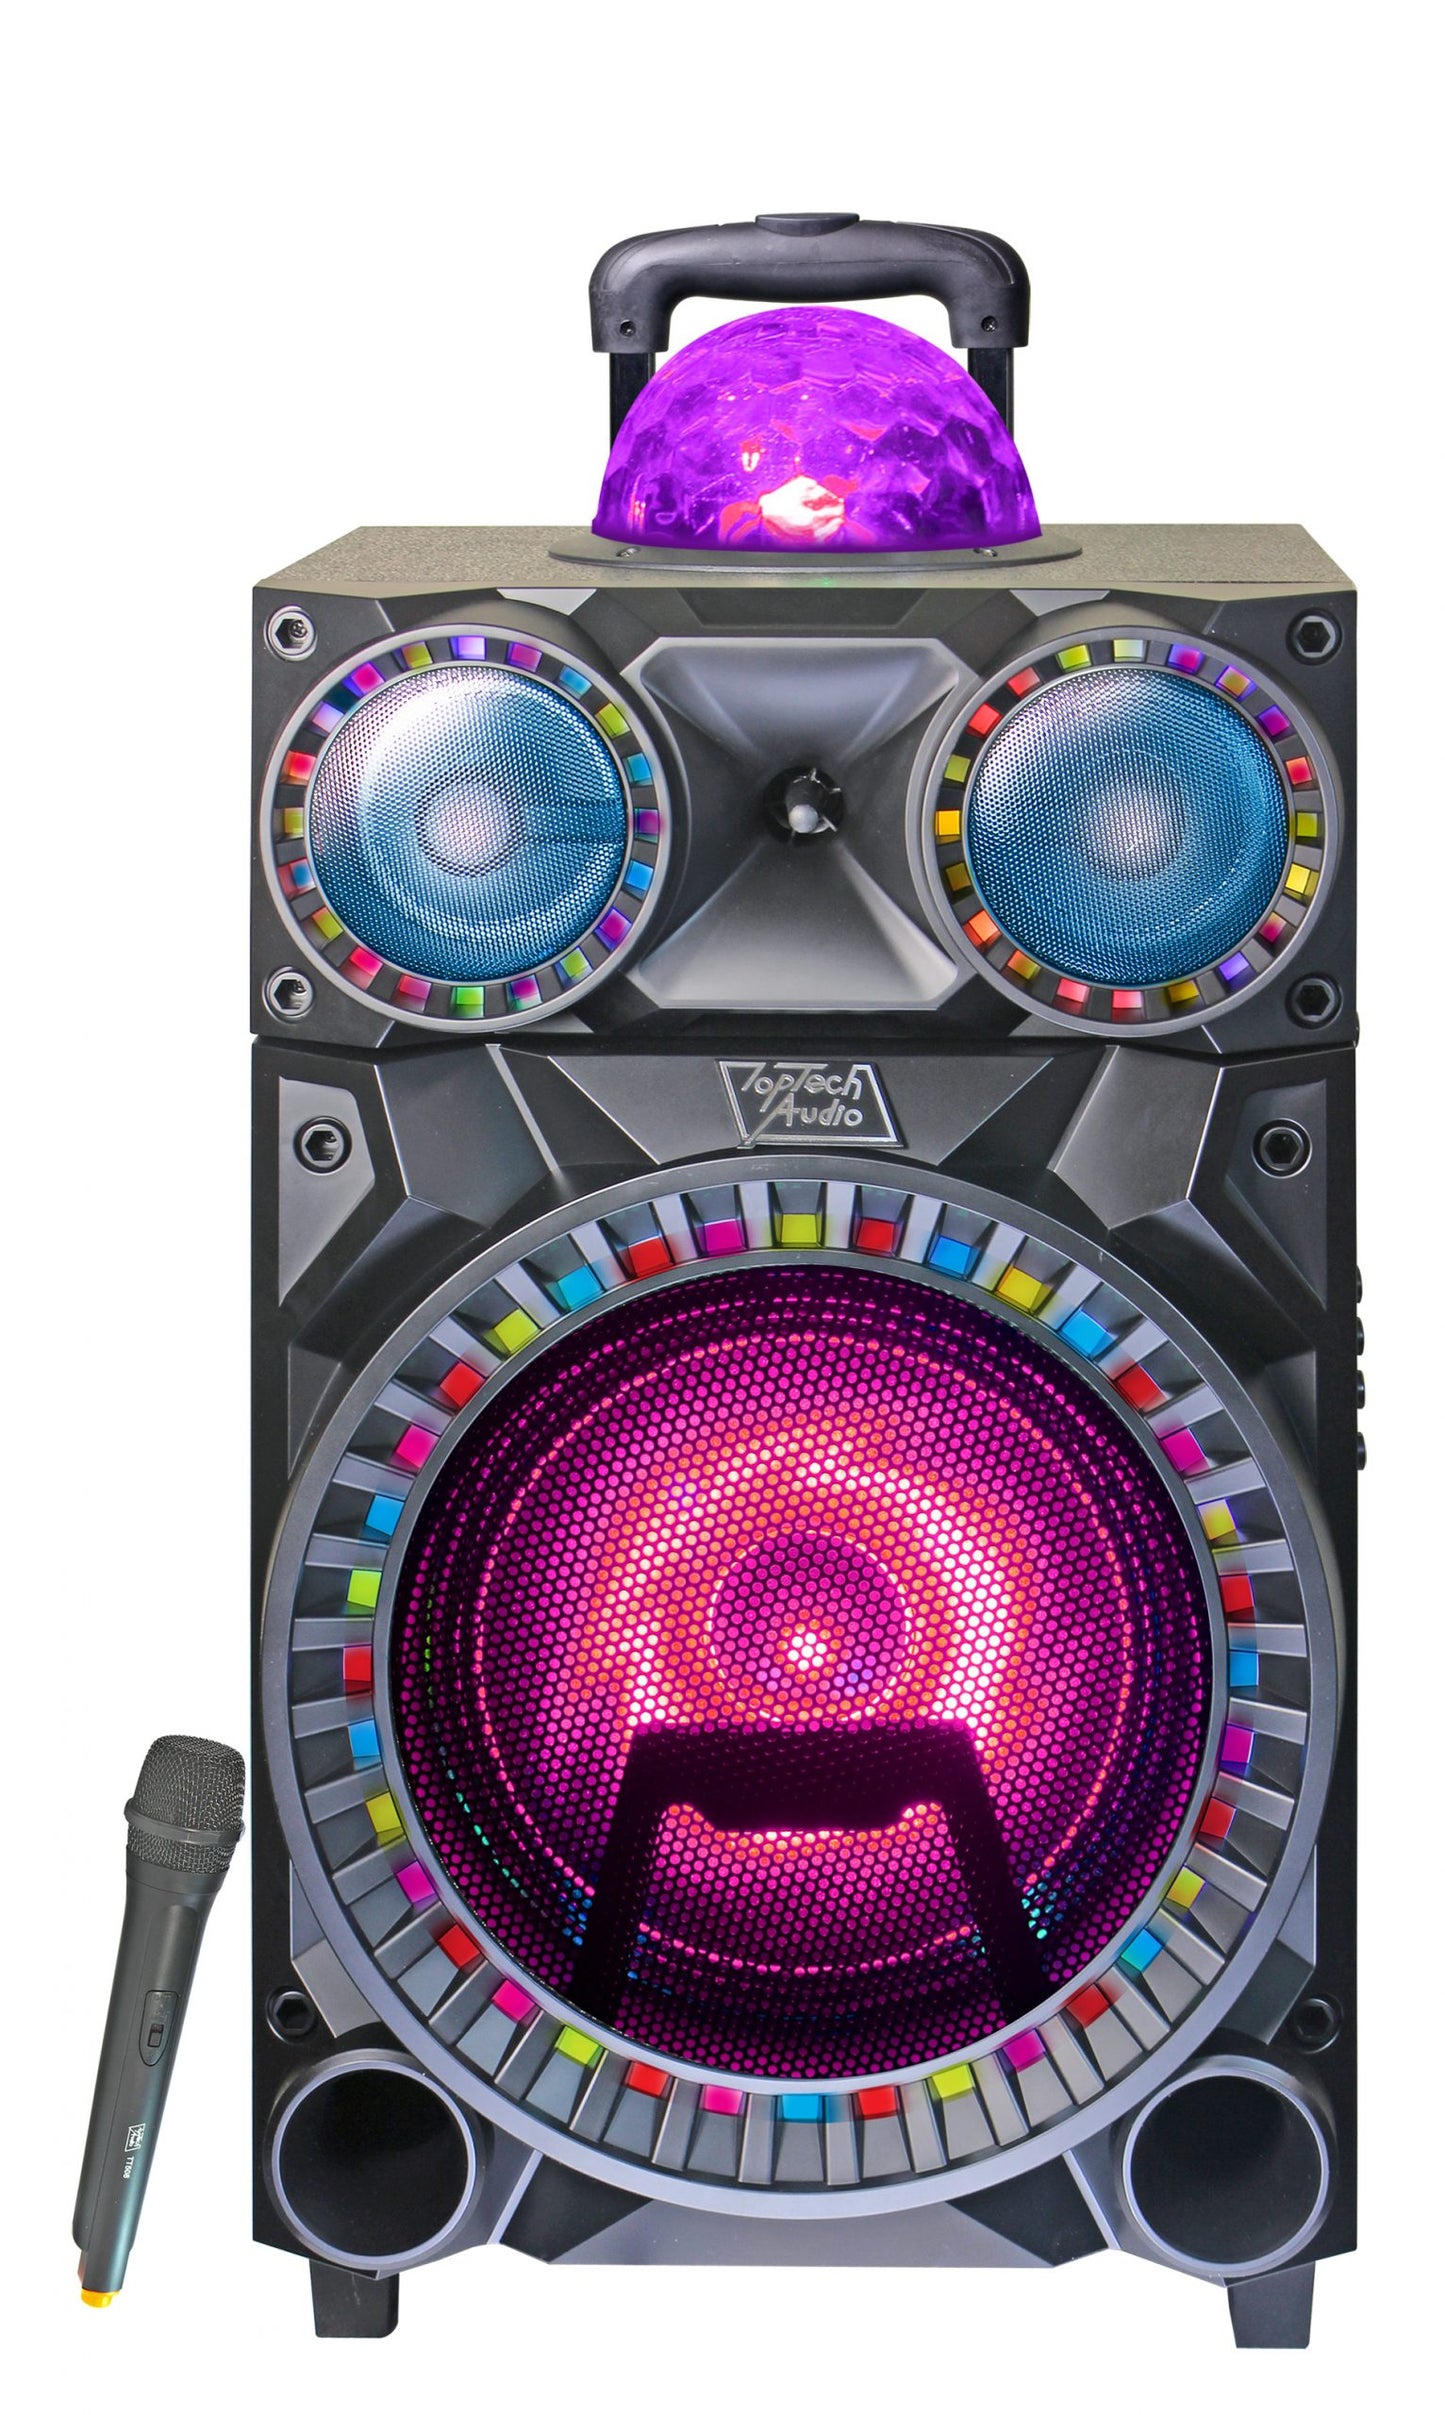 Fully Amplified Portable 3500 Watts Peak Power 10” Speaker with DISCO BALL